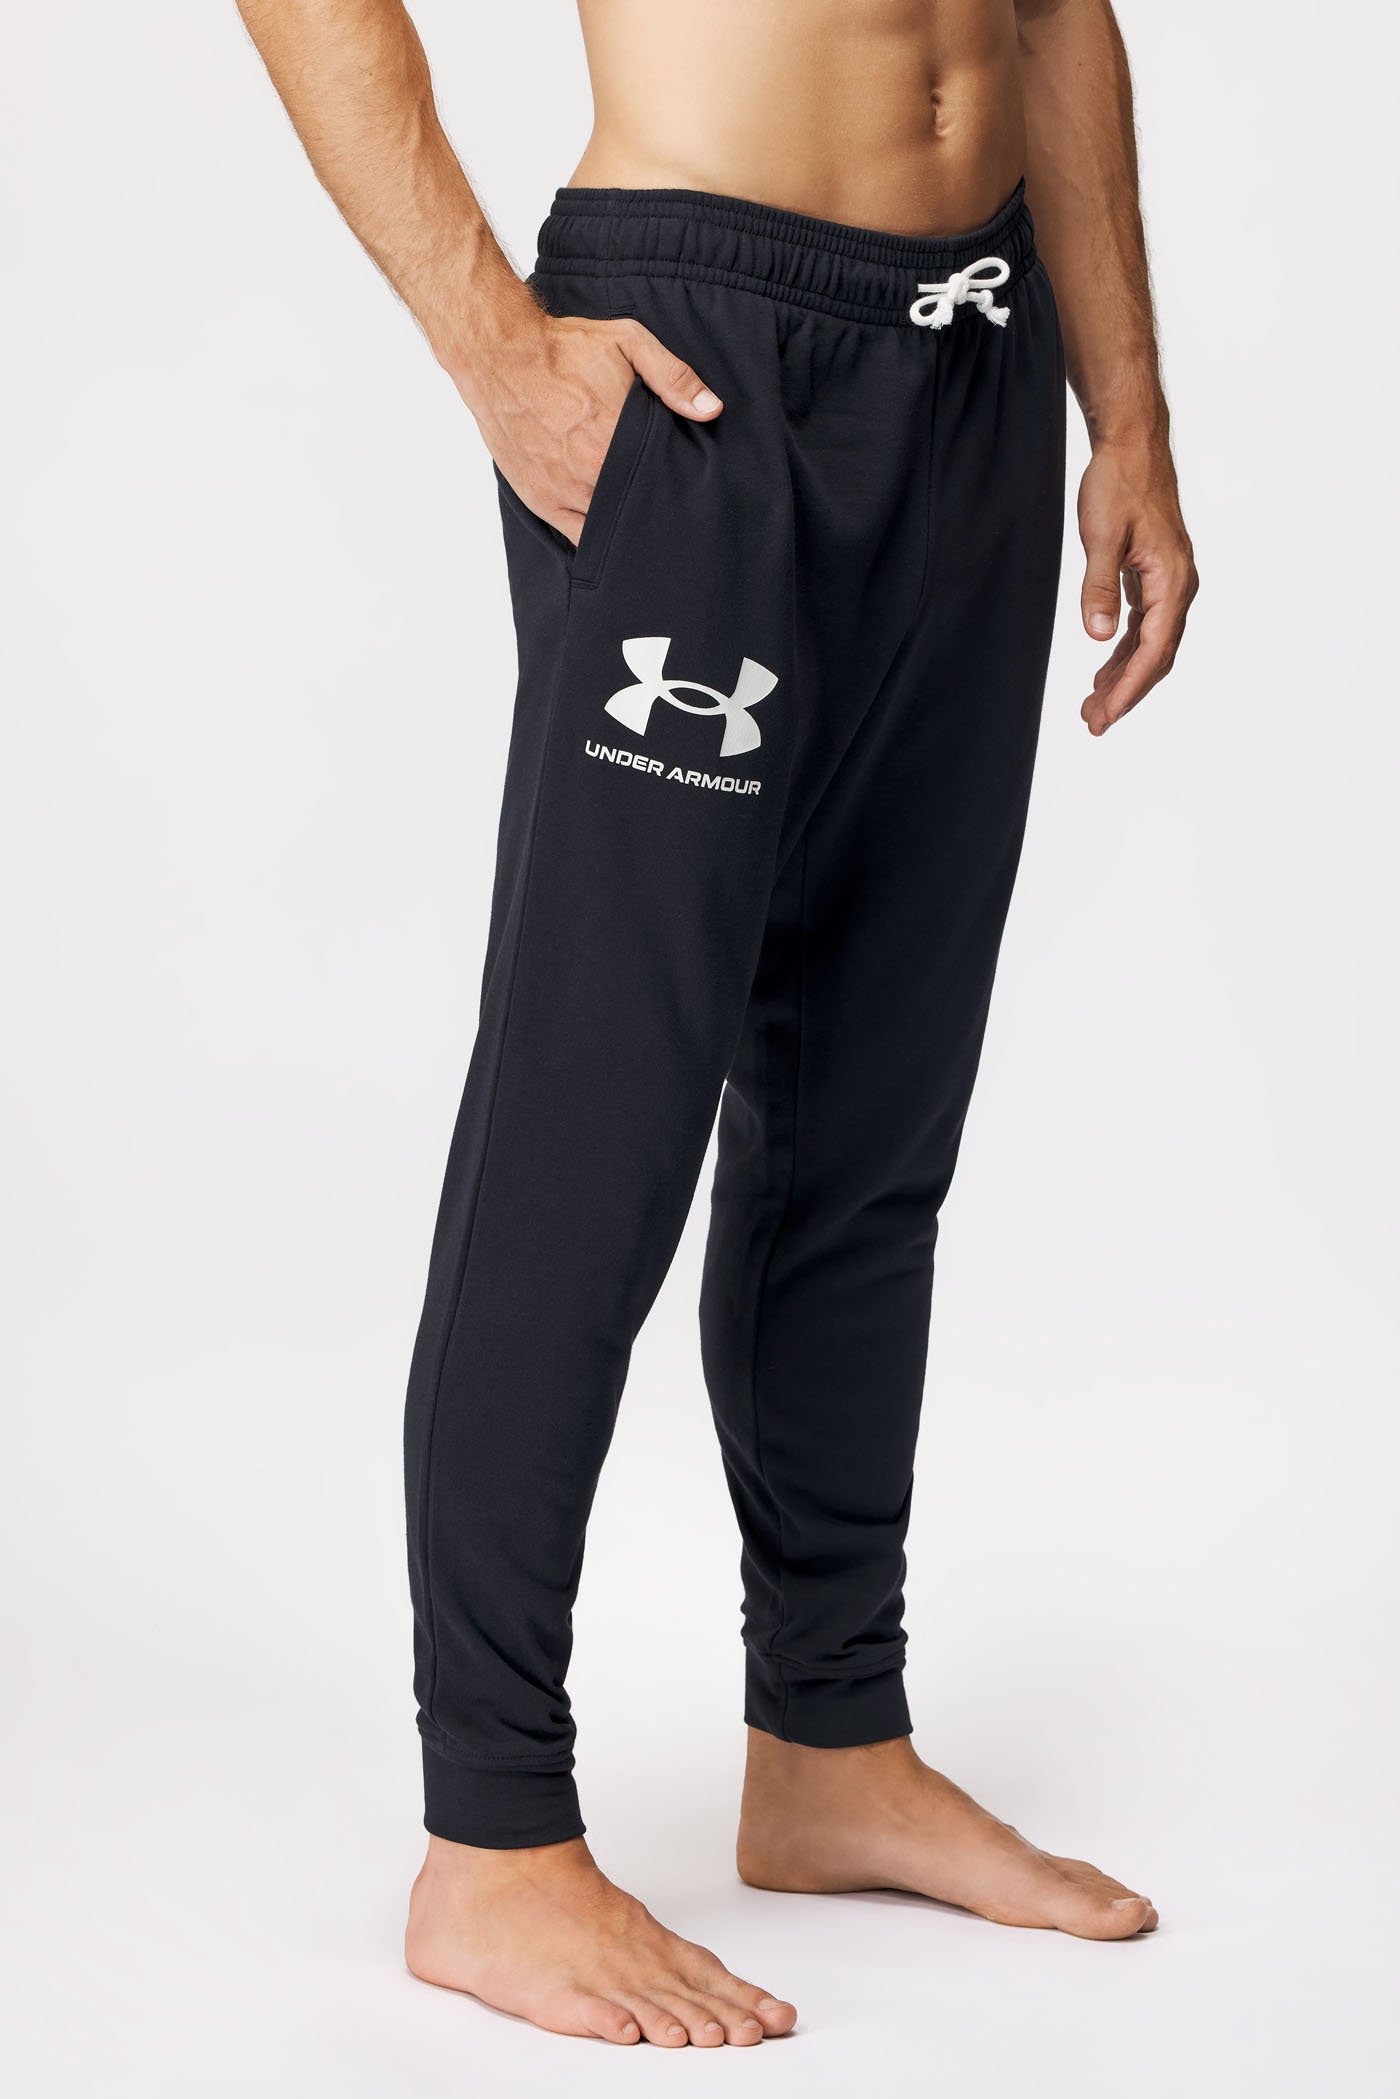 Crni donji dio trenirke Under Armour Rival Terry | Astratex.hr